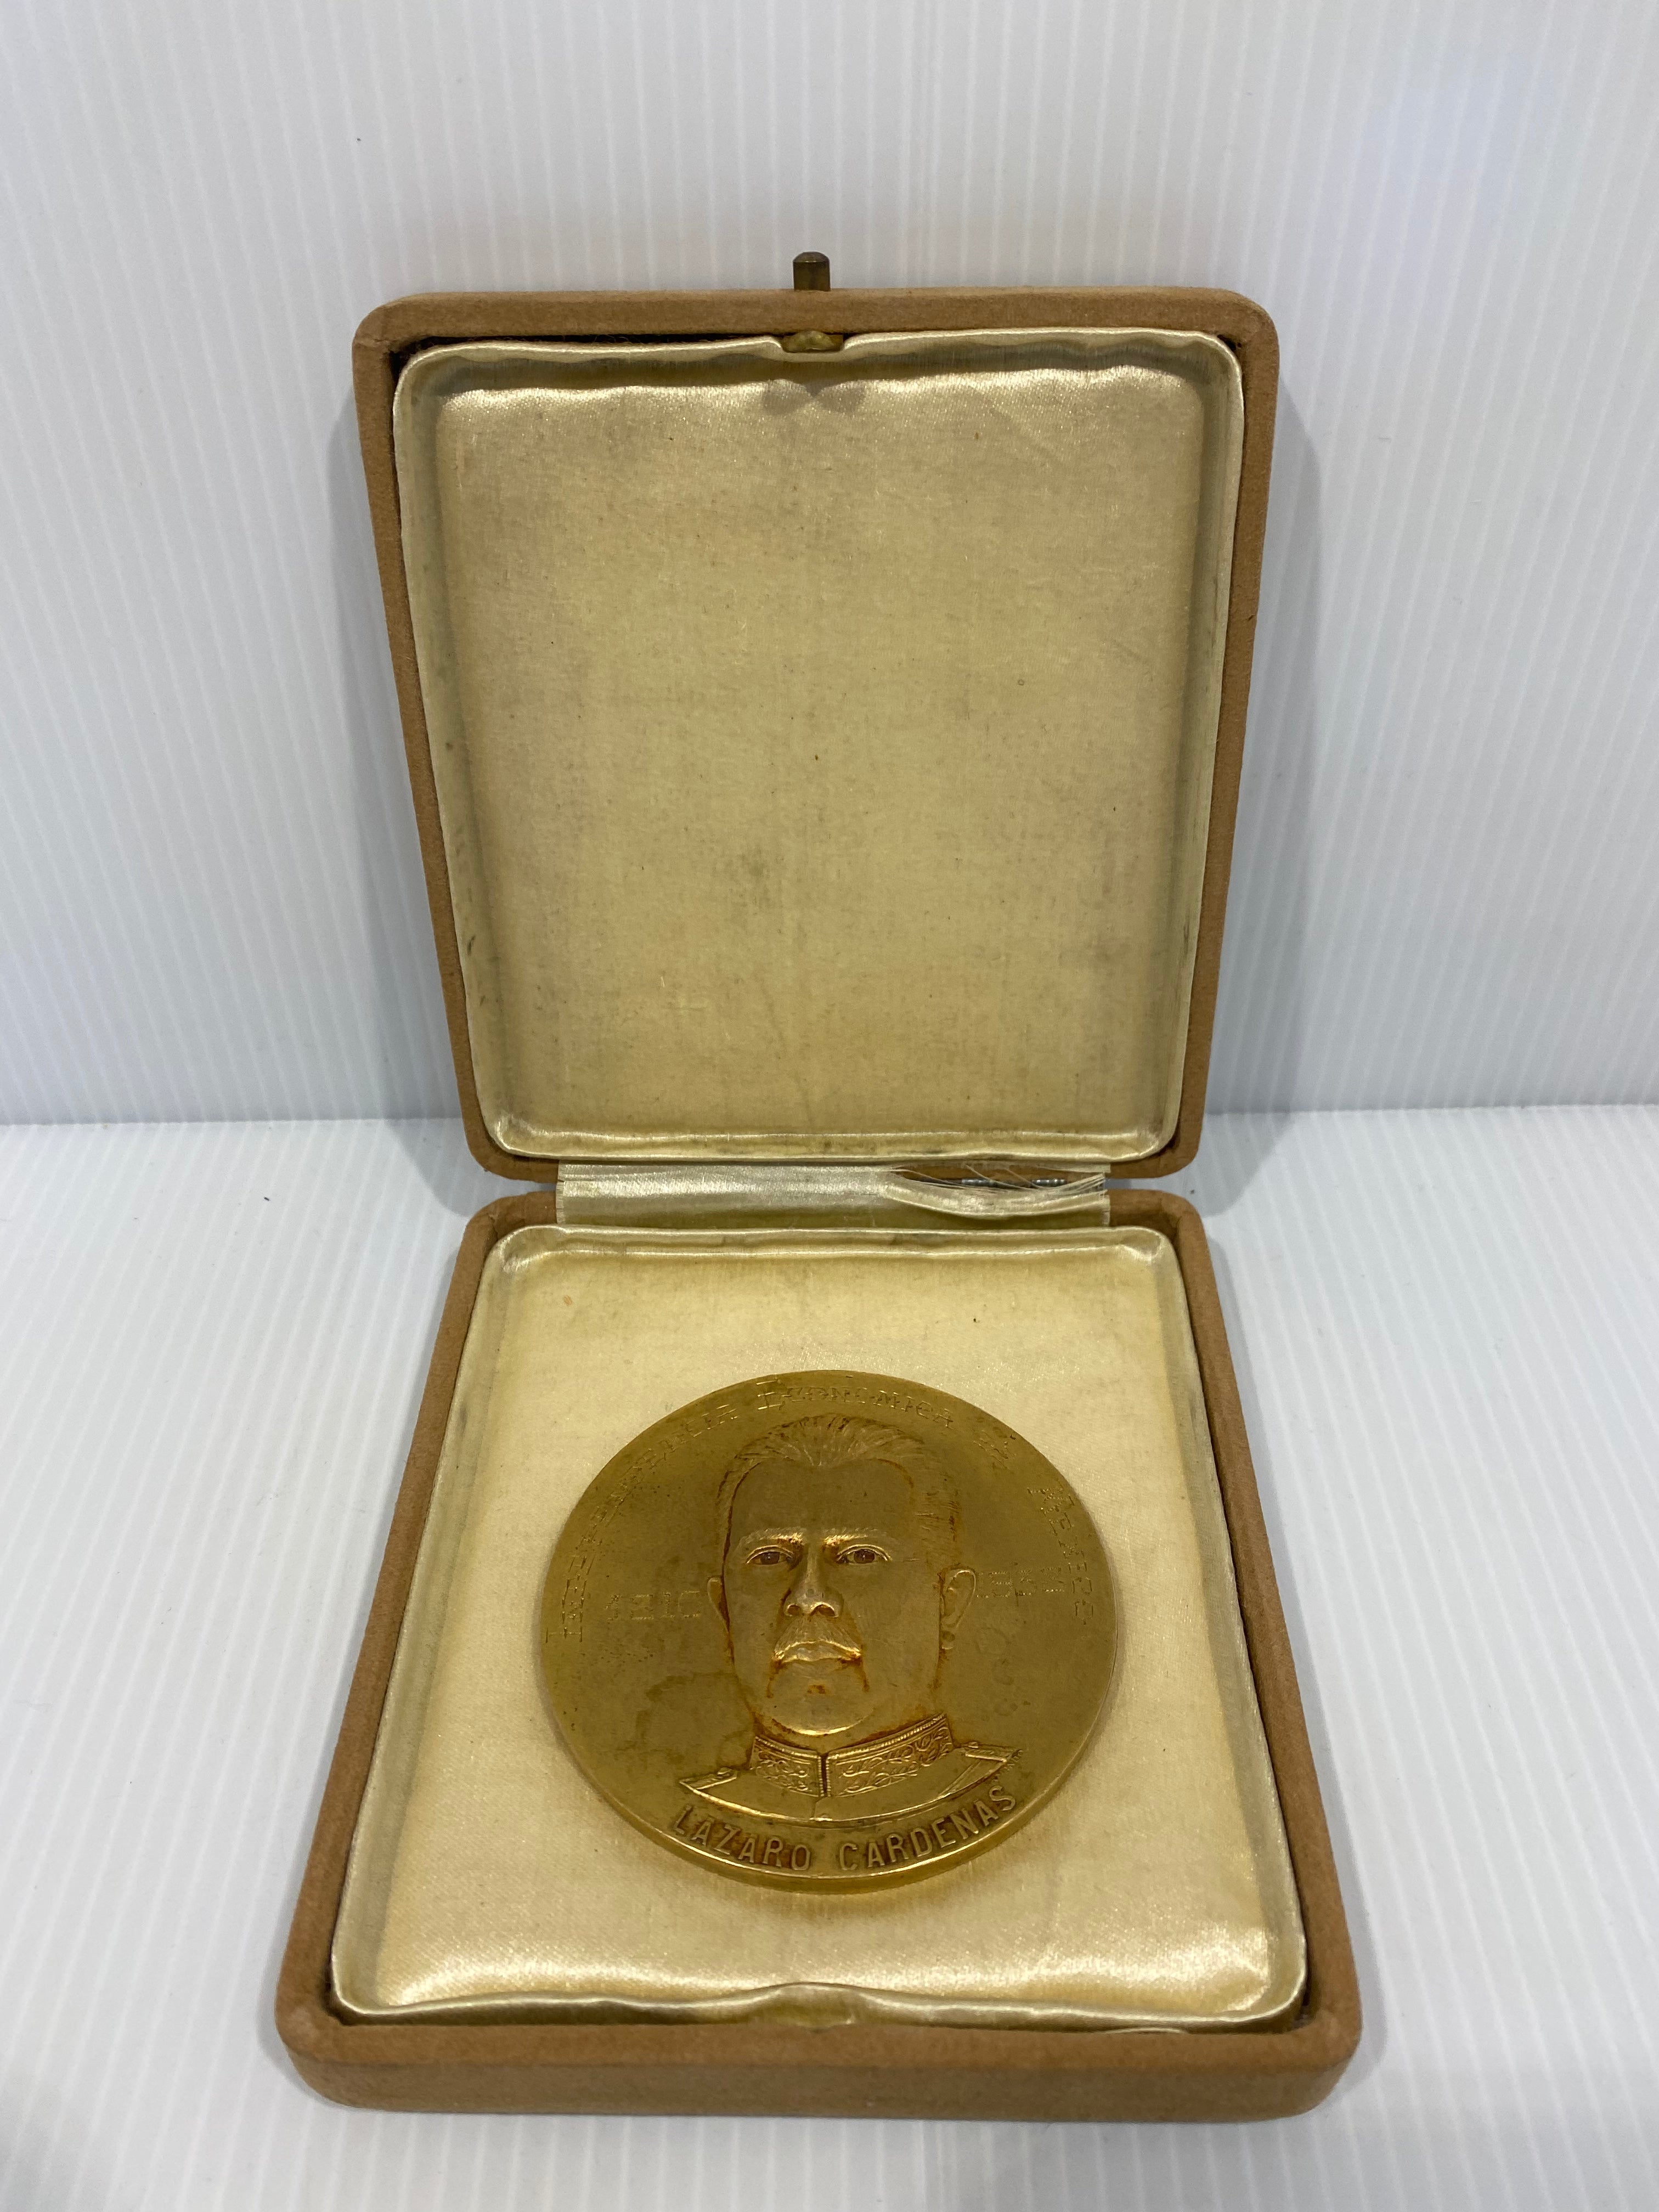 Historic Mexican oil expropriation medal 1938